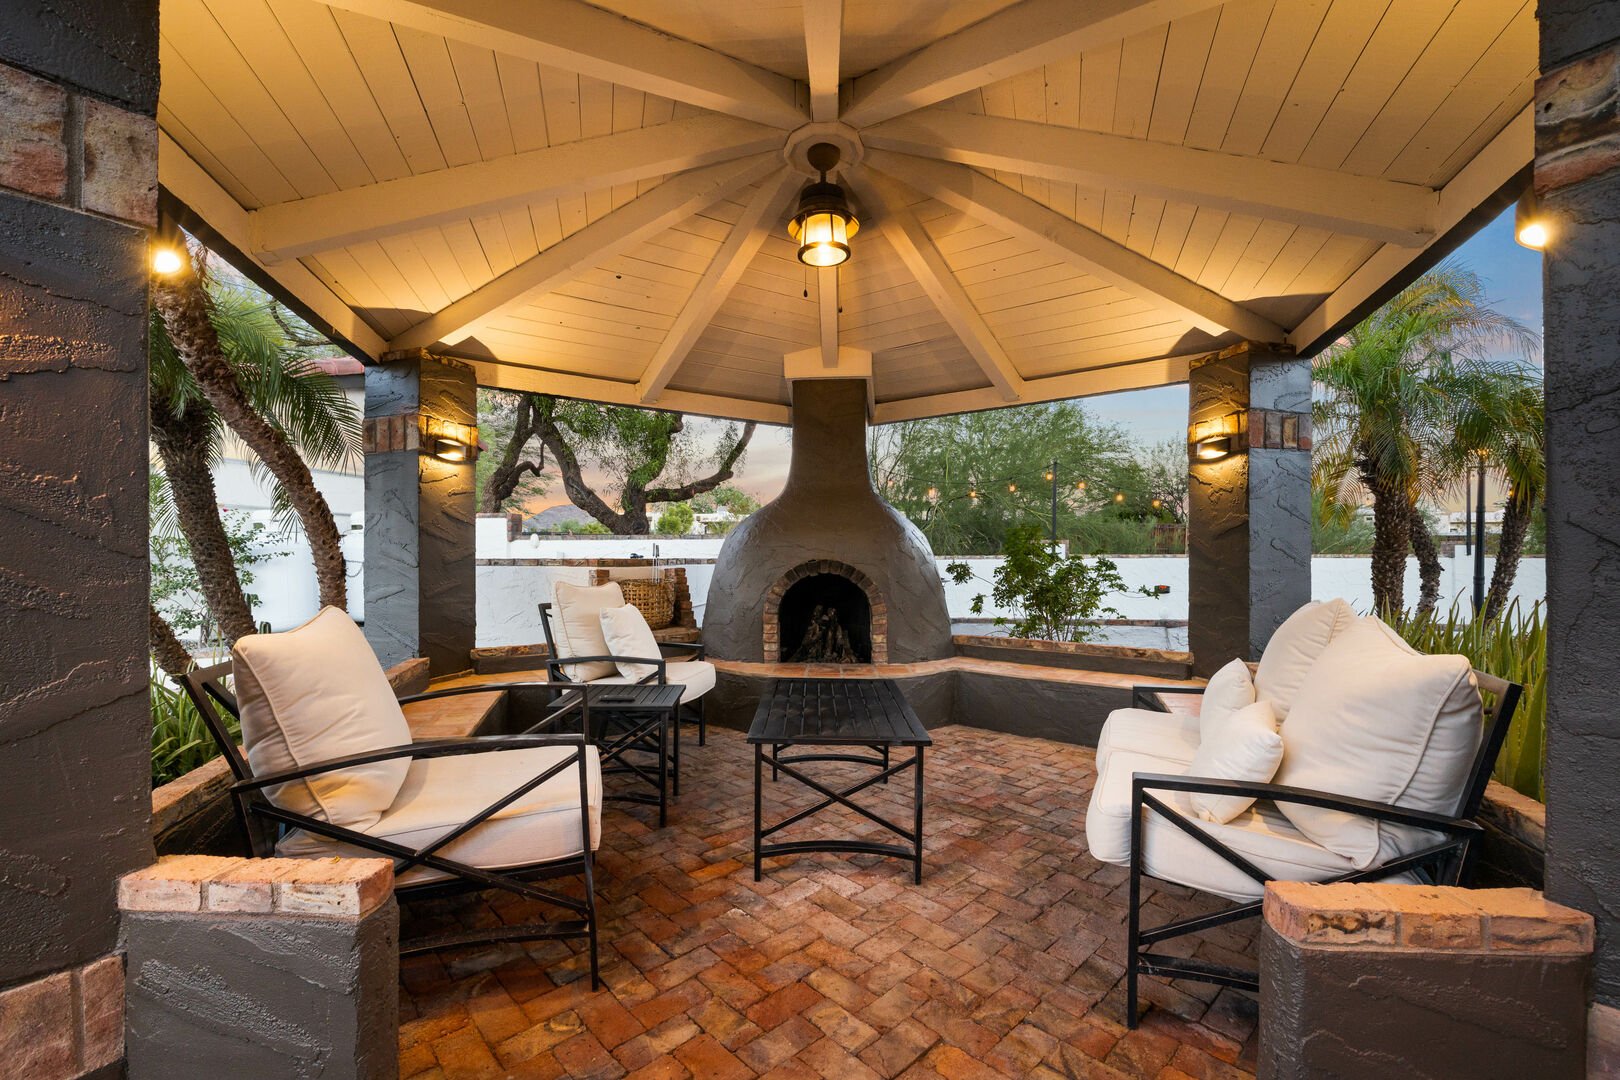 Covered Outdoor Entertainment Area